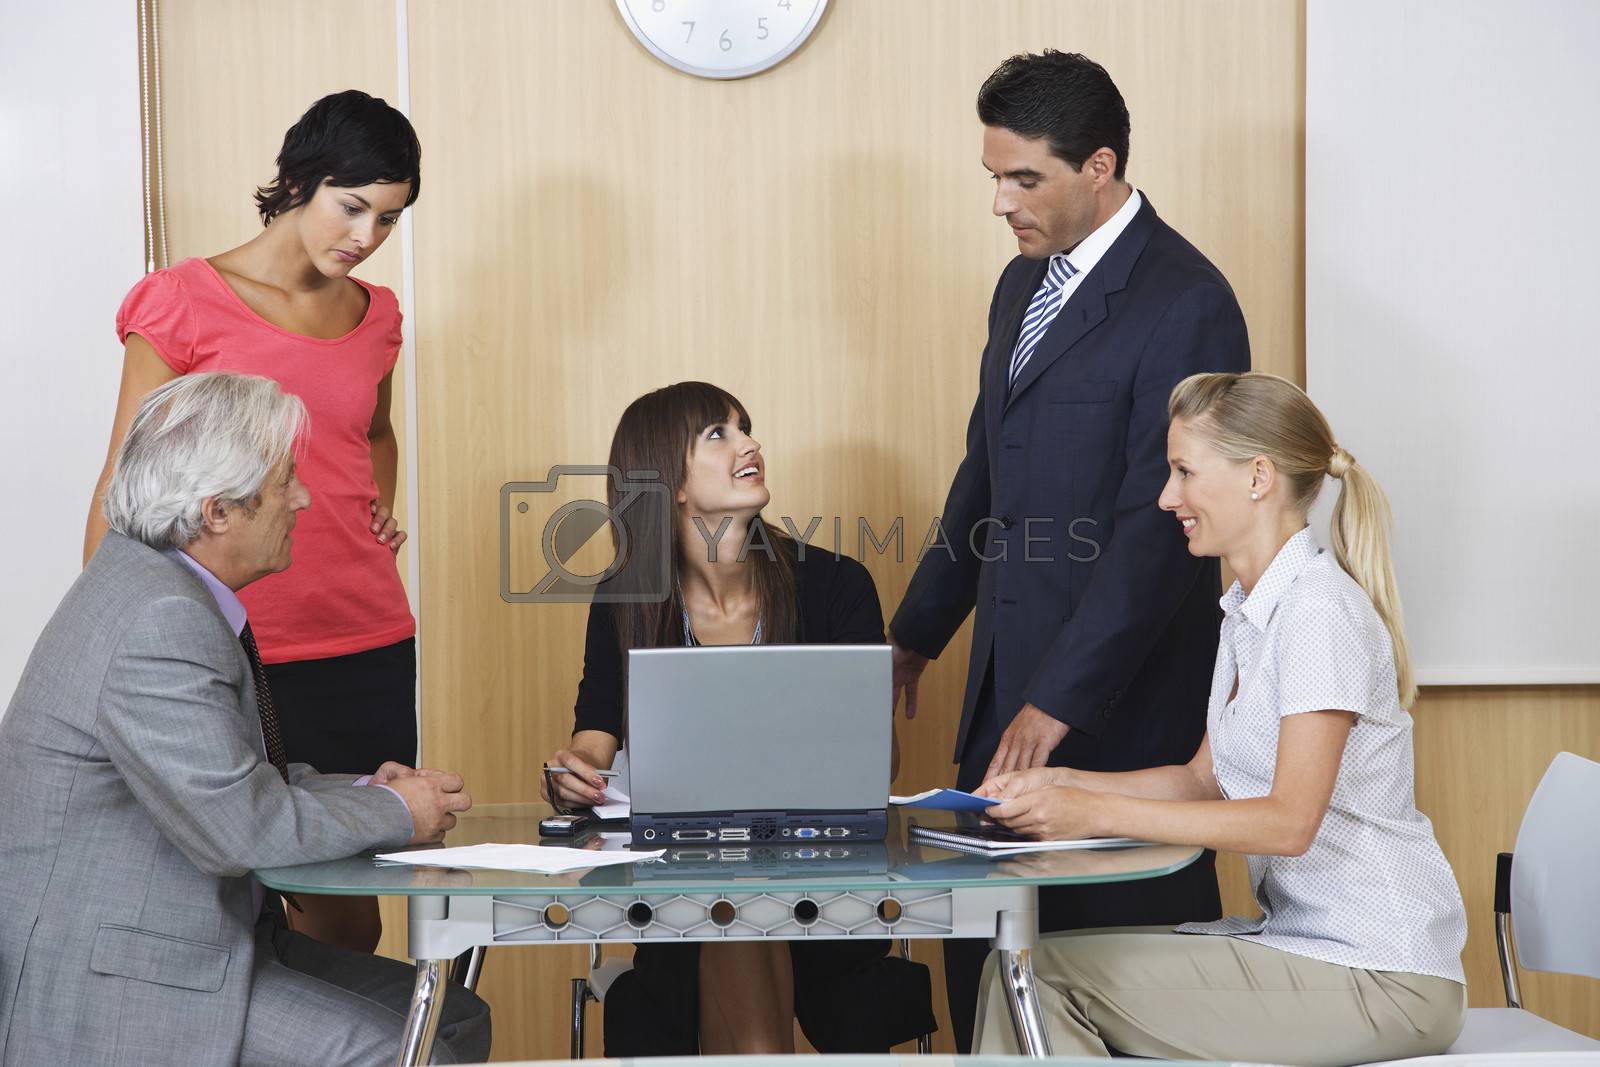 Royalty free image of Business people having meeting in conference room by moodboard